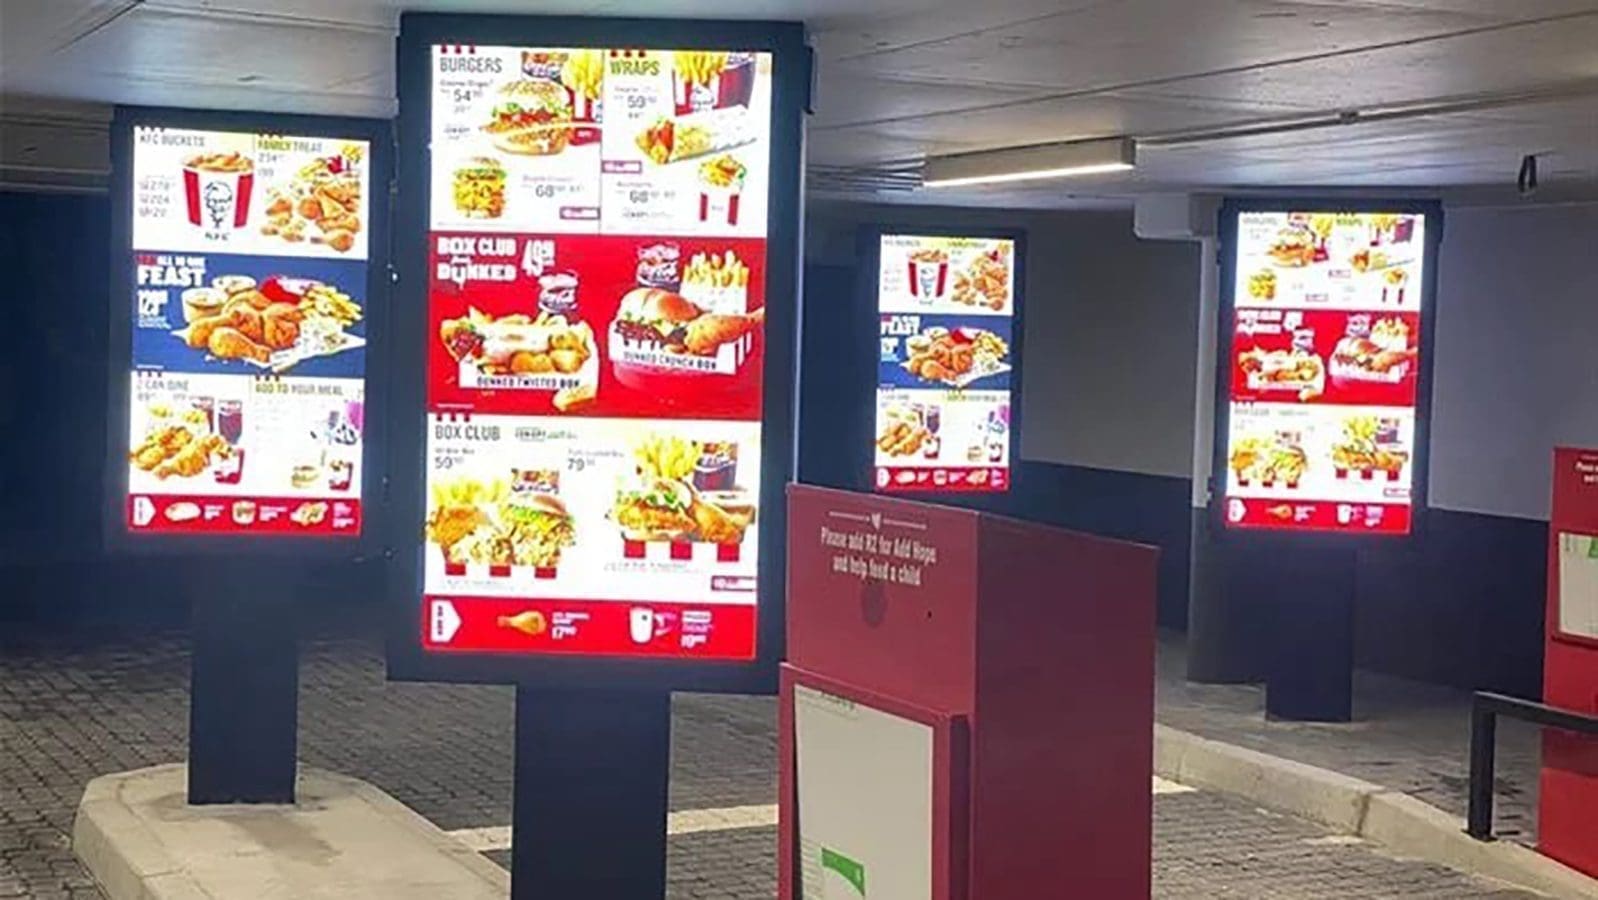 KFC launches new high-tech restaurant in South Africa to enable seamless service delivery